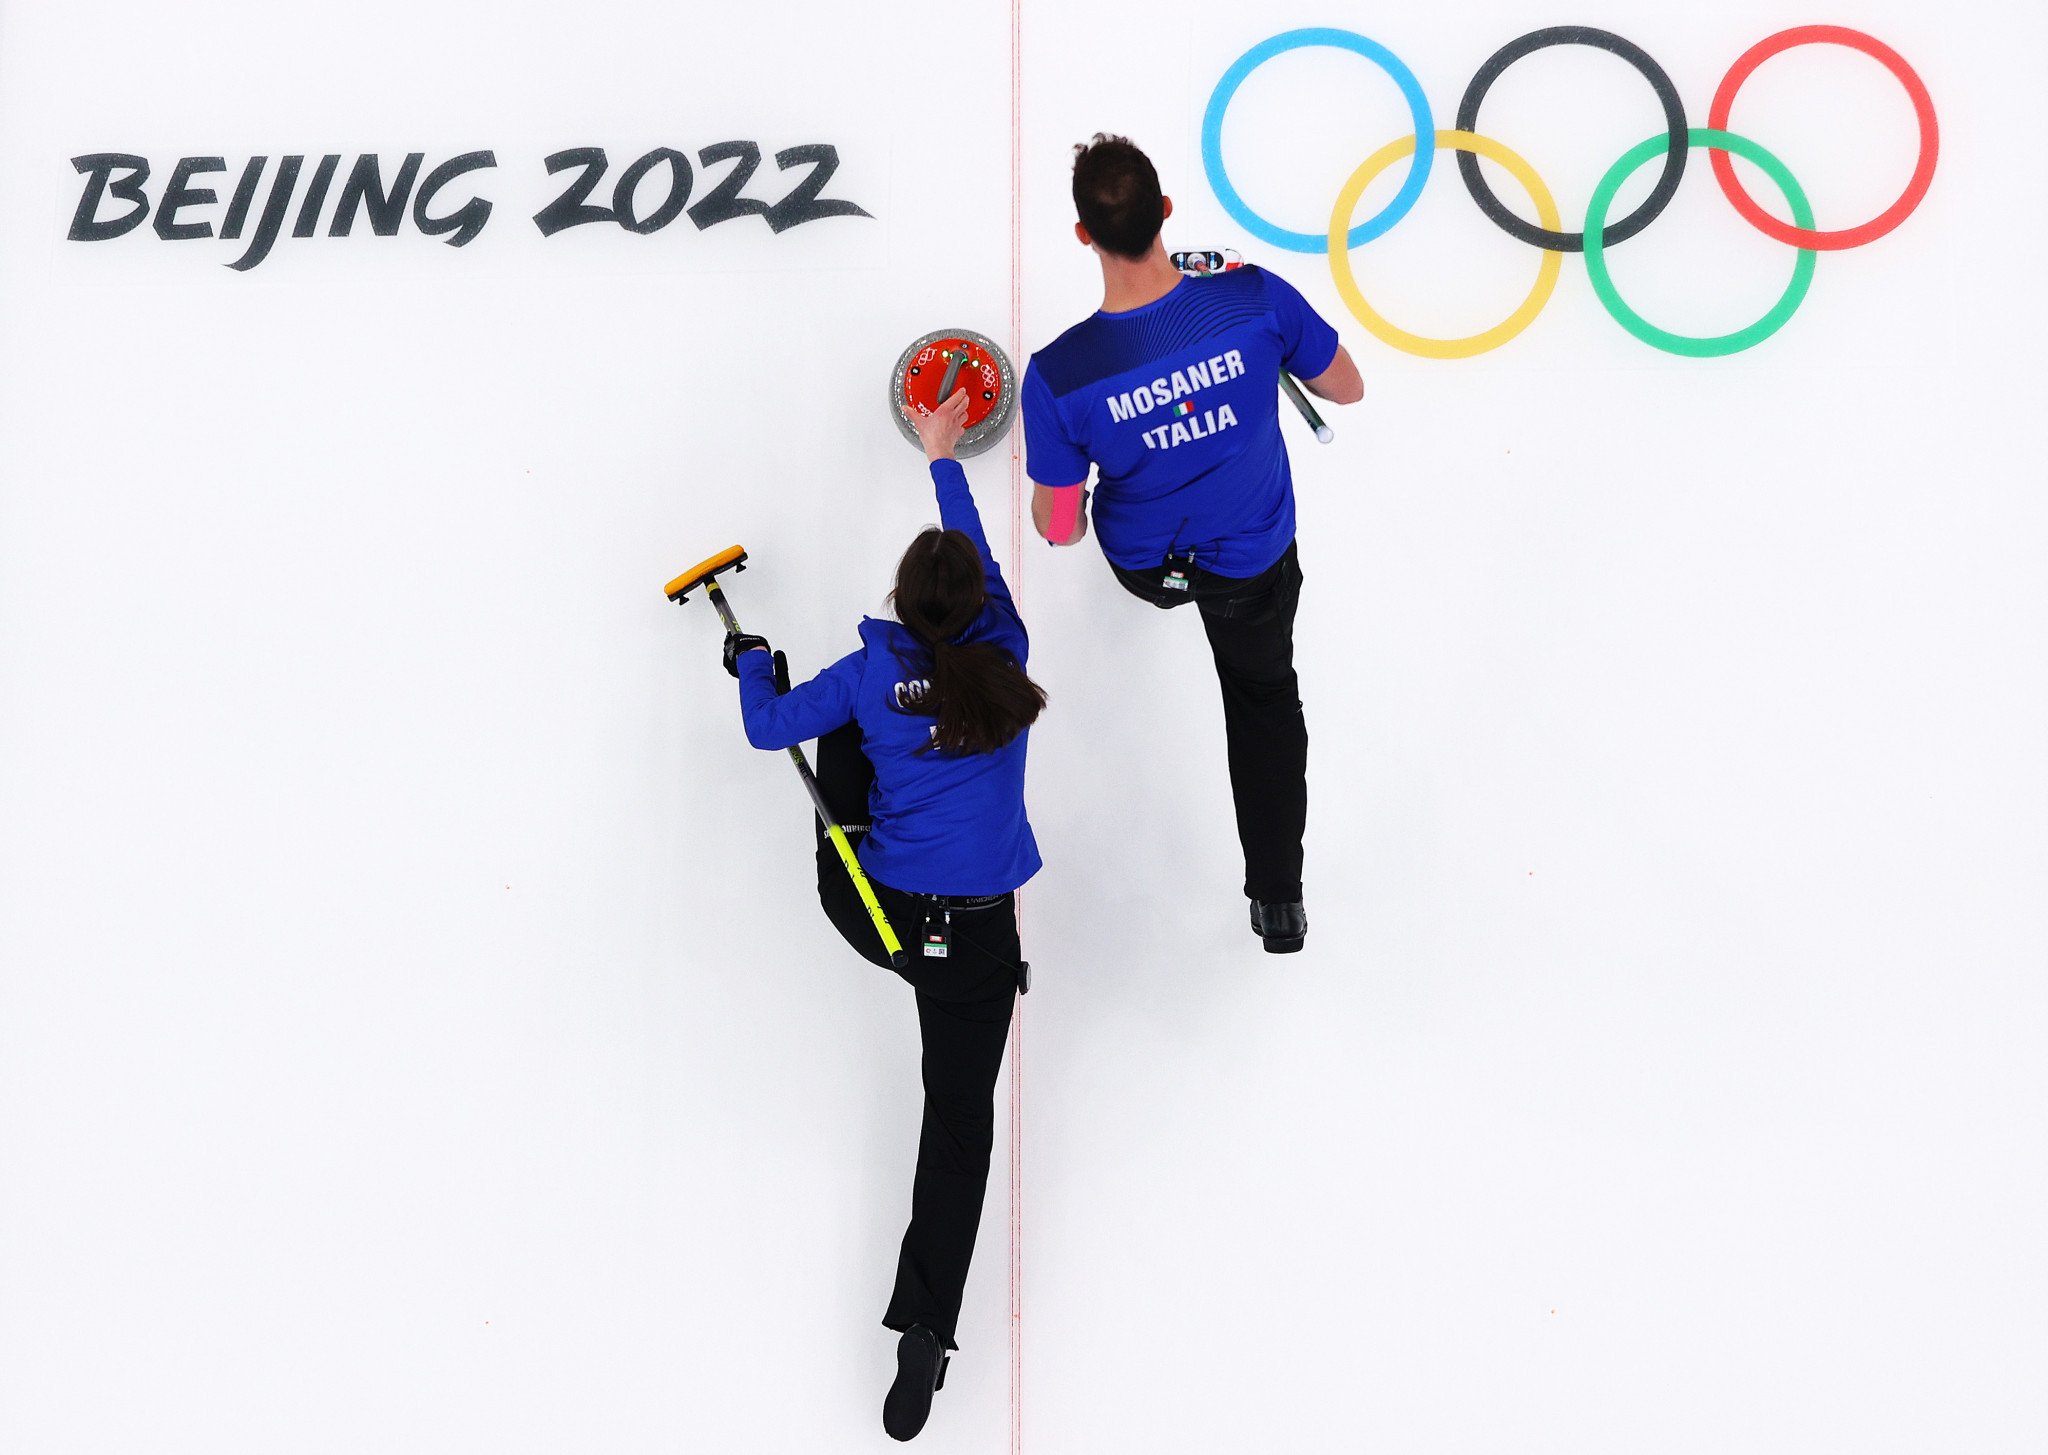 Italy's curling preparations for Milan Cortina 2026 have received a boost with the appointment of a technical director ©Getty Images